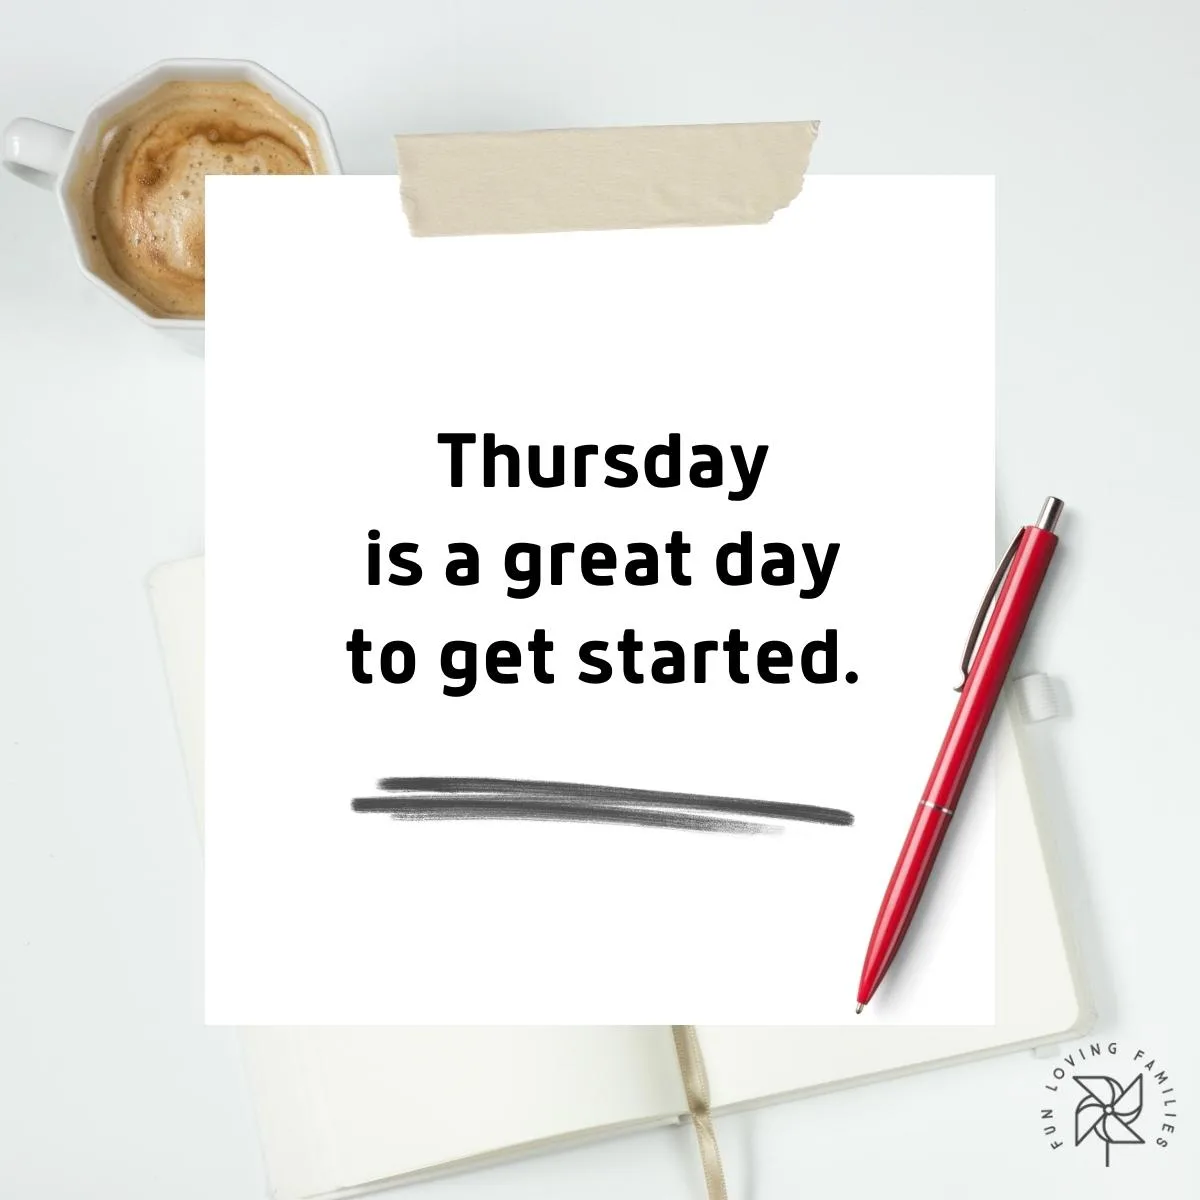 Thursday is a great day to get started affirmation